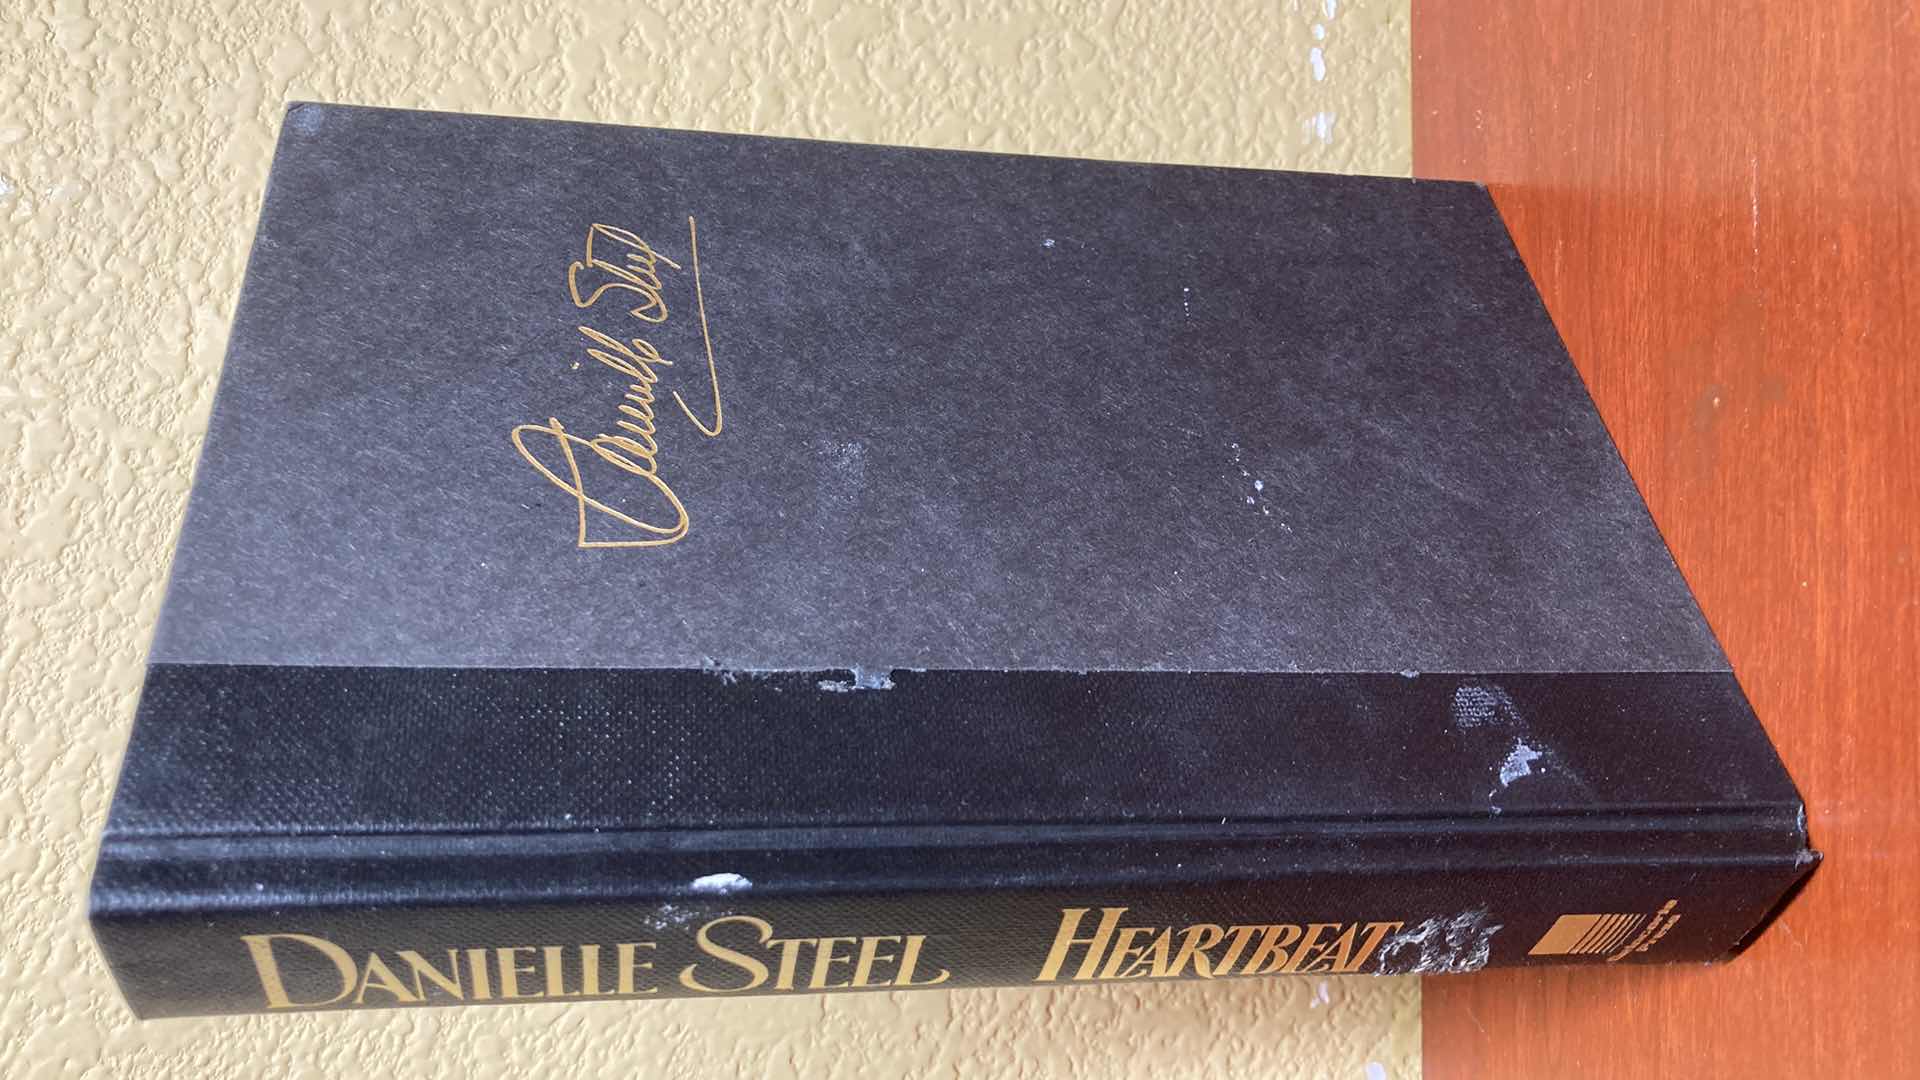 Photo 1 of HEARTBEAT AUTOGRAPHED BY DANIELLE STEEL HARD COVER BOOK